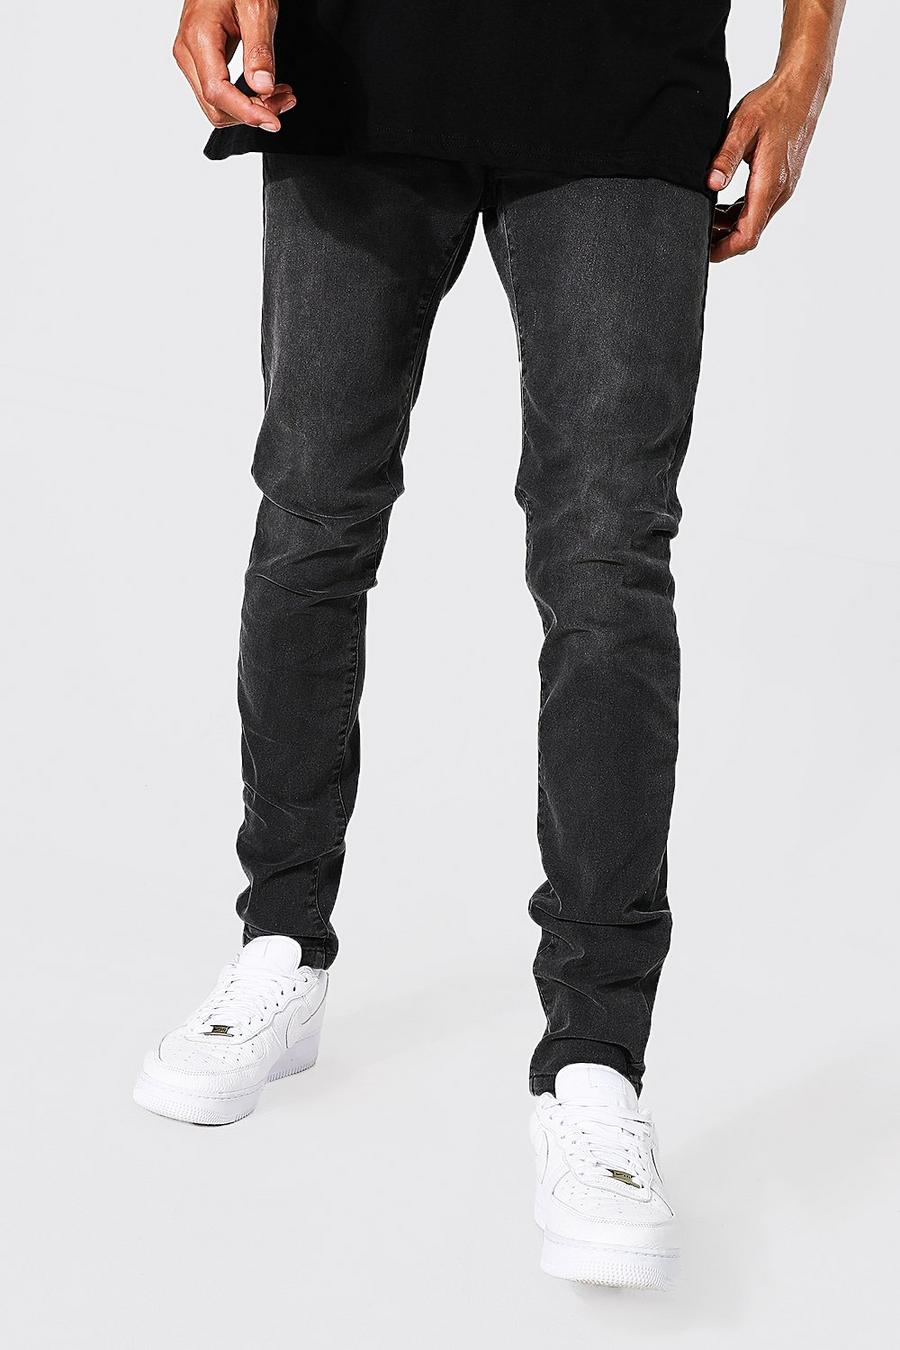 Jeans Tall Skinny Fit in Stretch con cotone riciclato, Charcoal gris